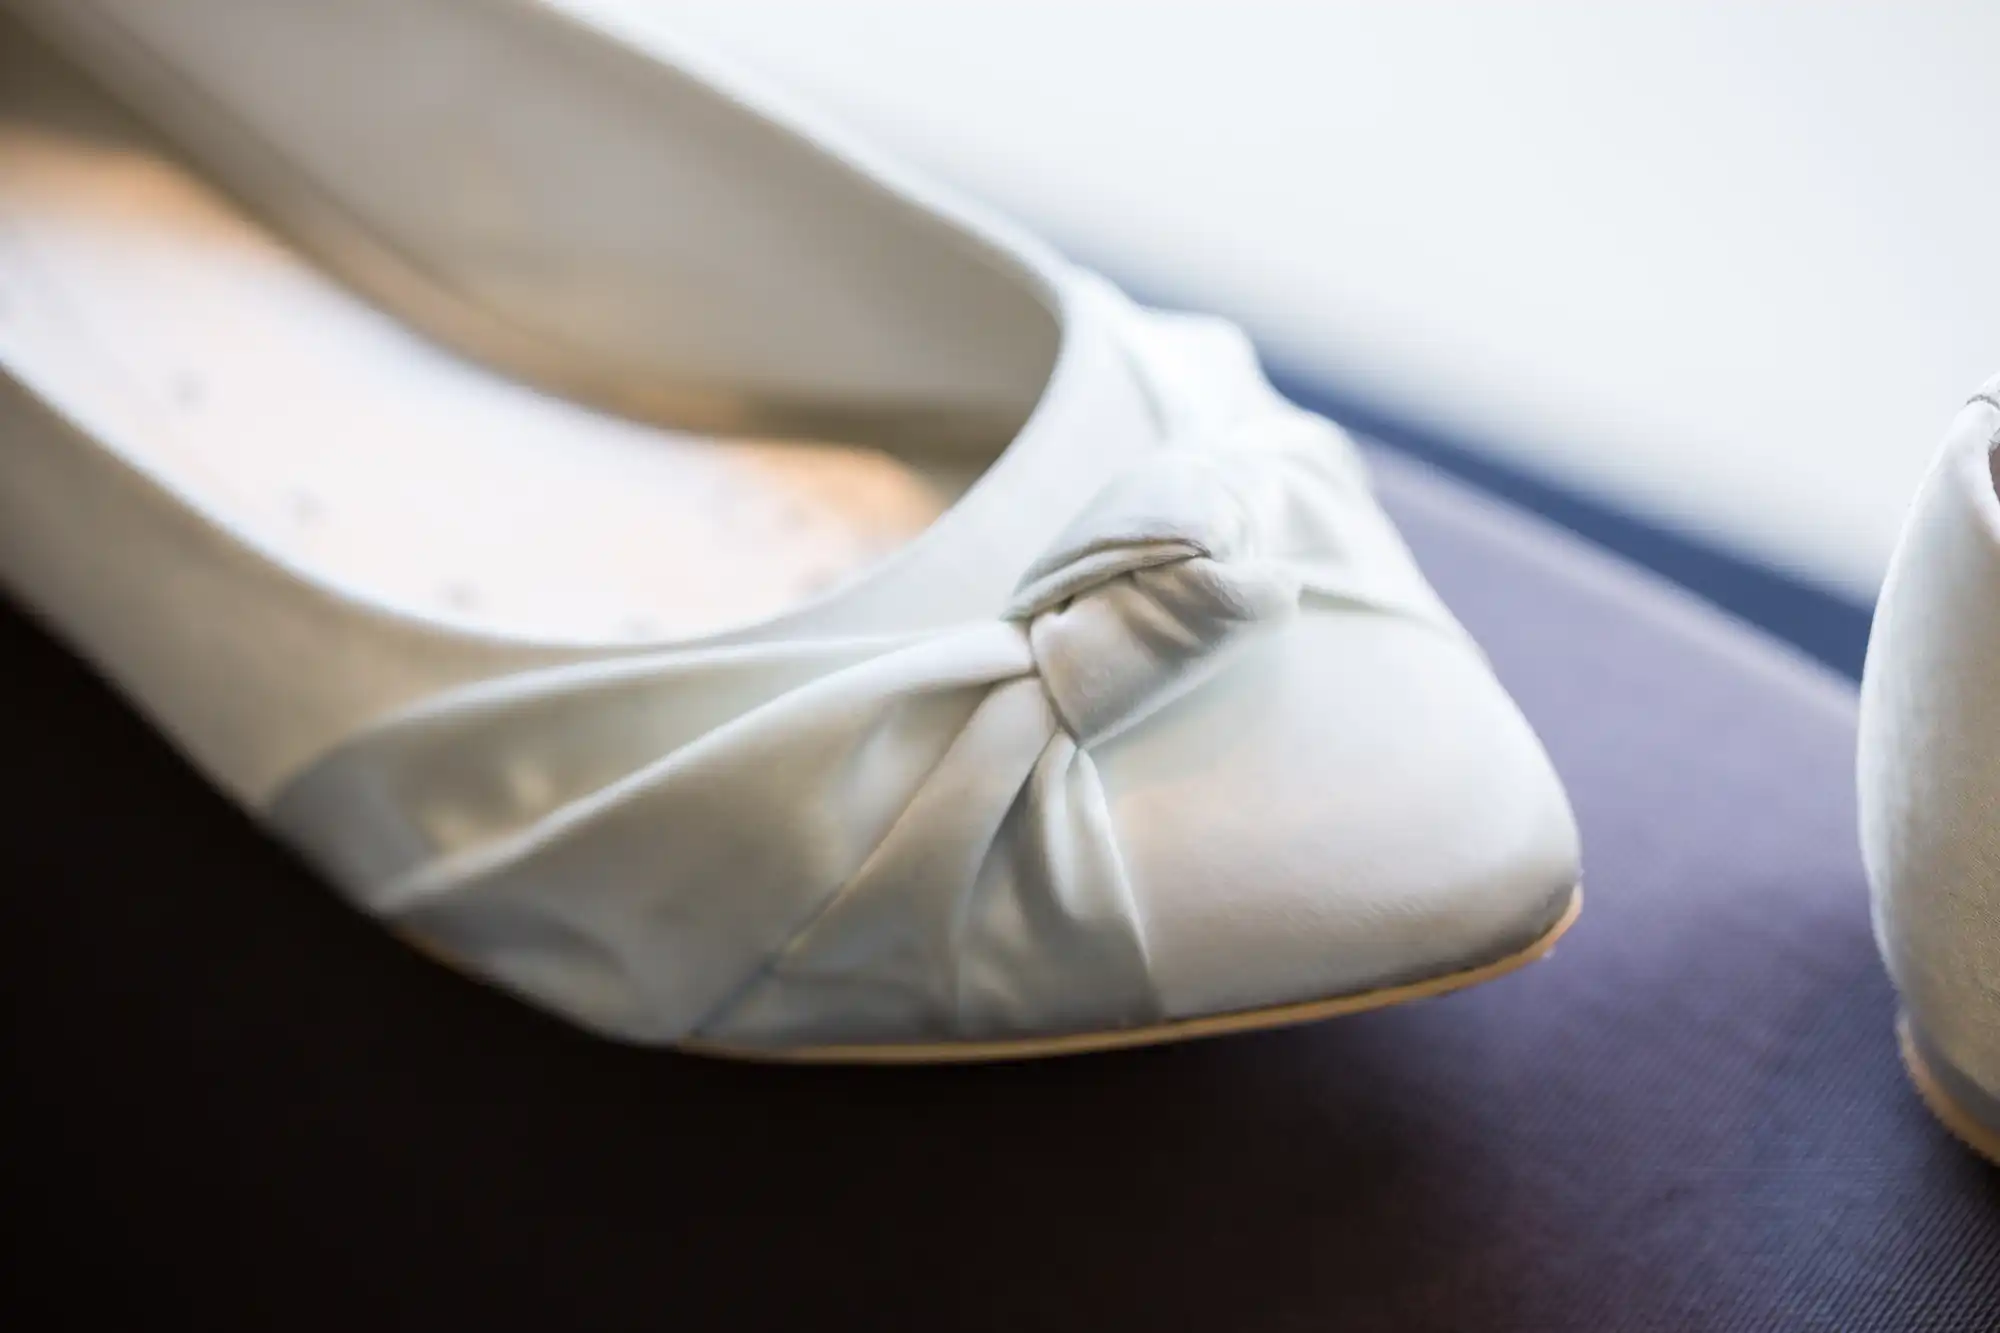 Close-up of a worn white ballet flat with a twisted bow on the toe, resting on a dark surface.